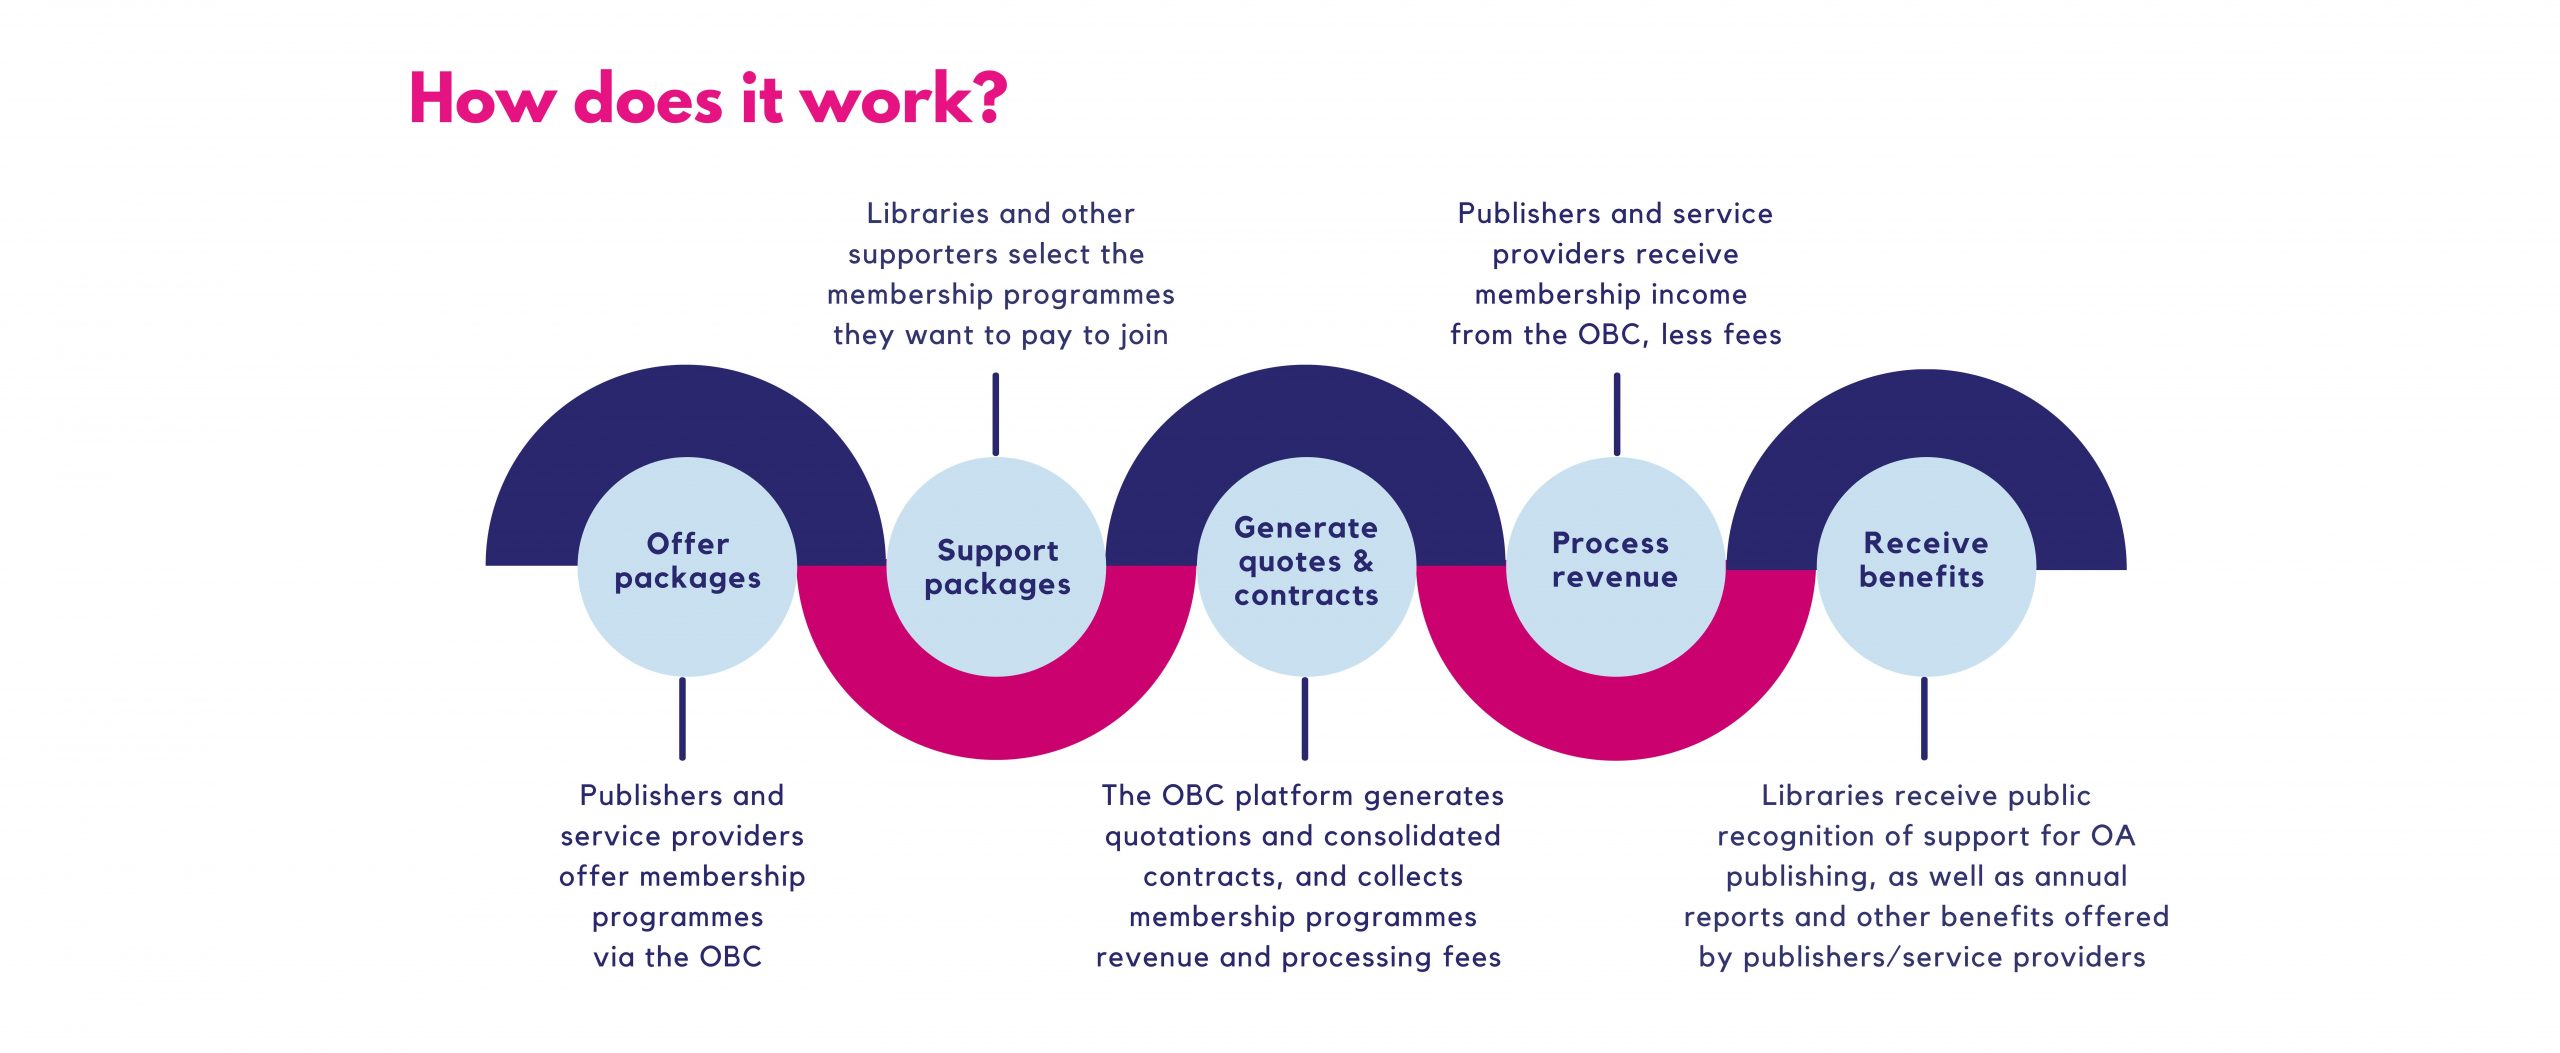 Image depicts a diagram of the OBC workflow. Publishers and service providers offer membership programs on the OBC platform enabling libraries and other institutions to more easily provide financial support to open access initiatives.